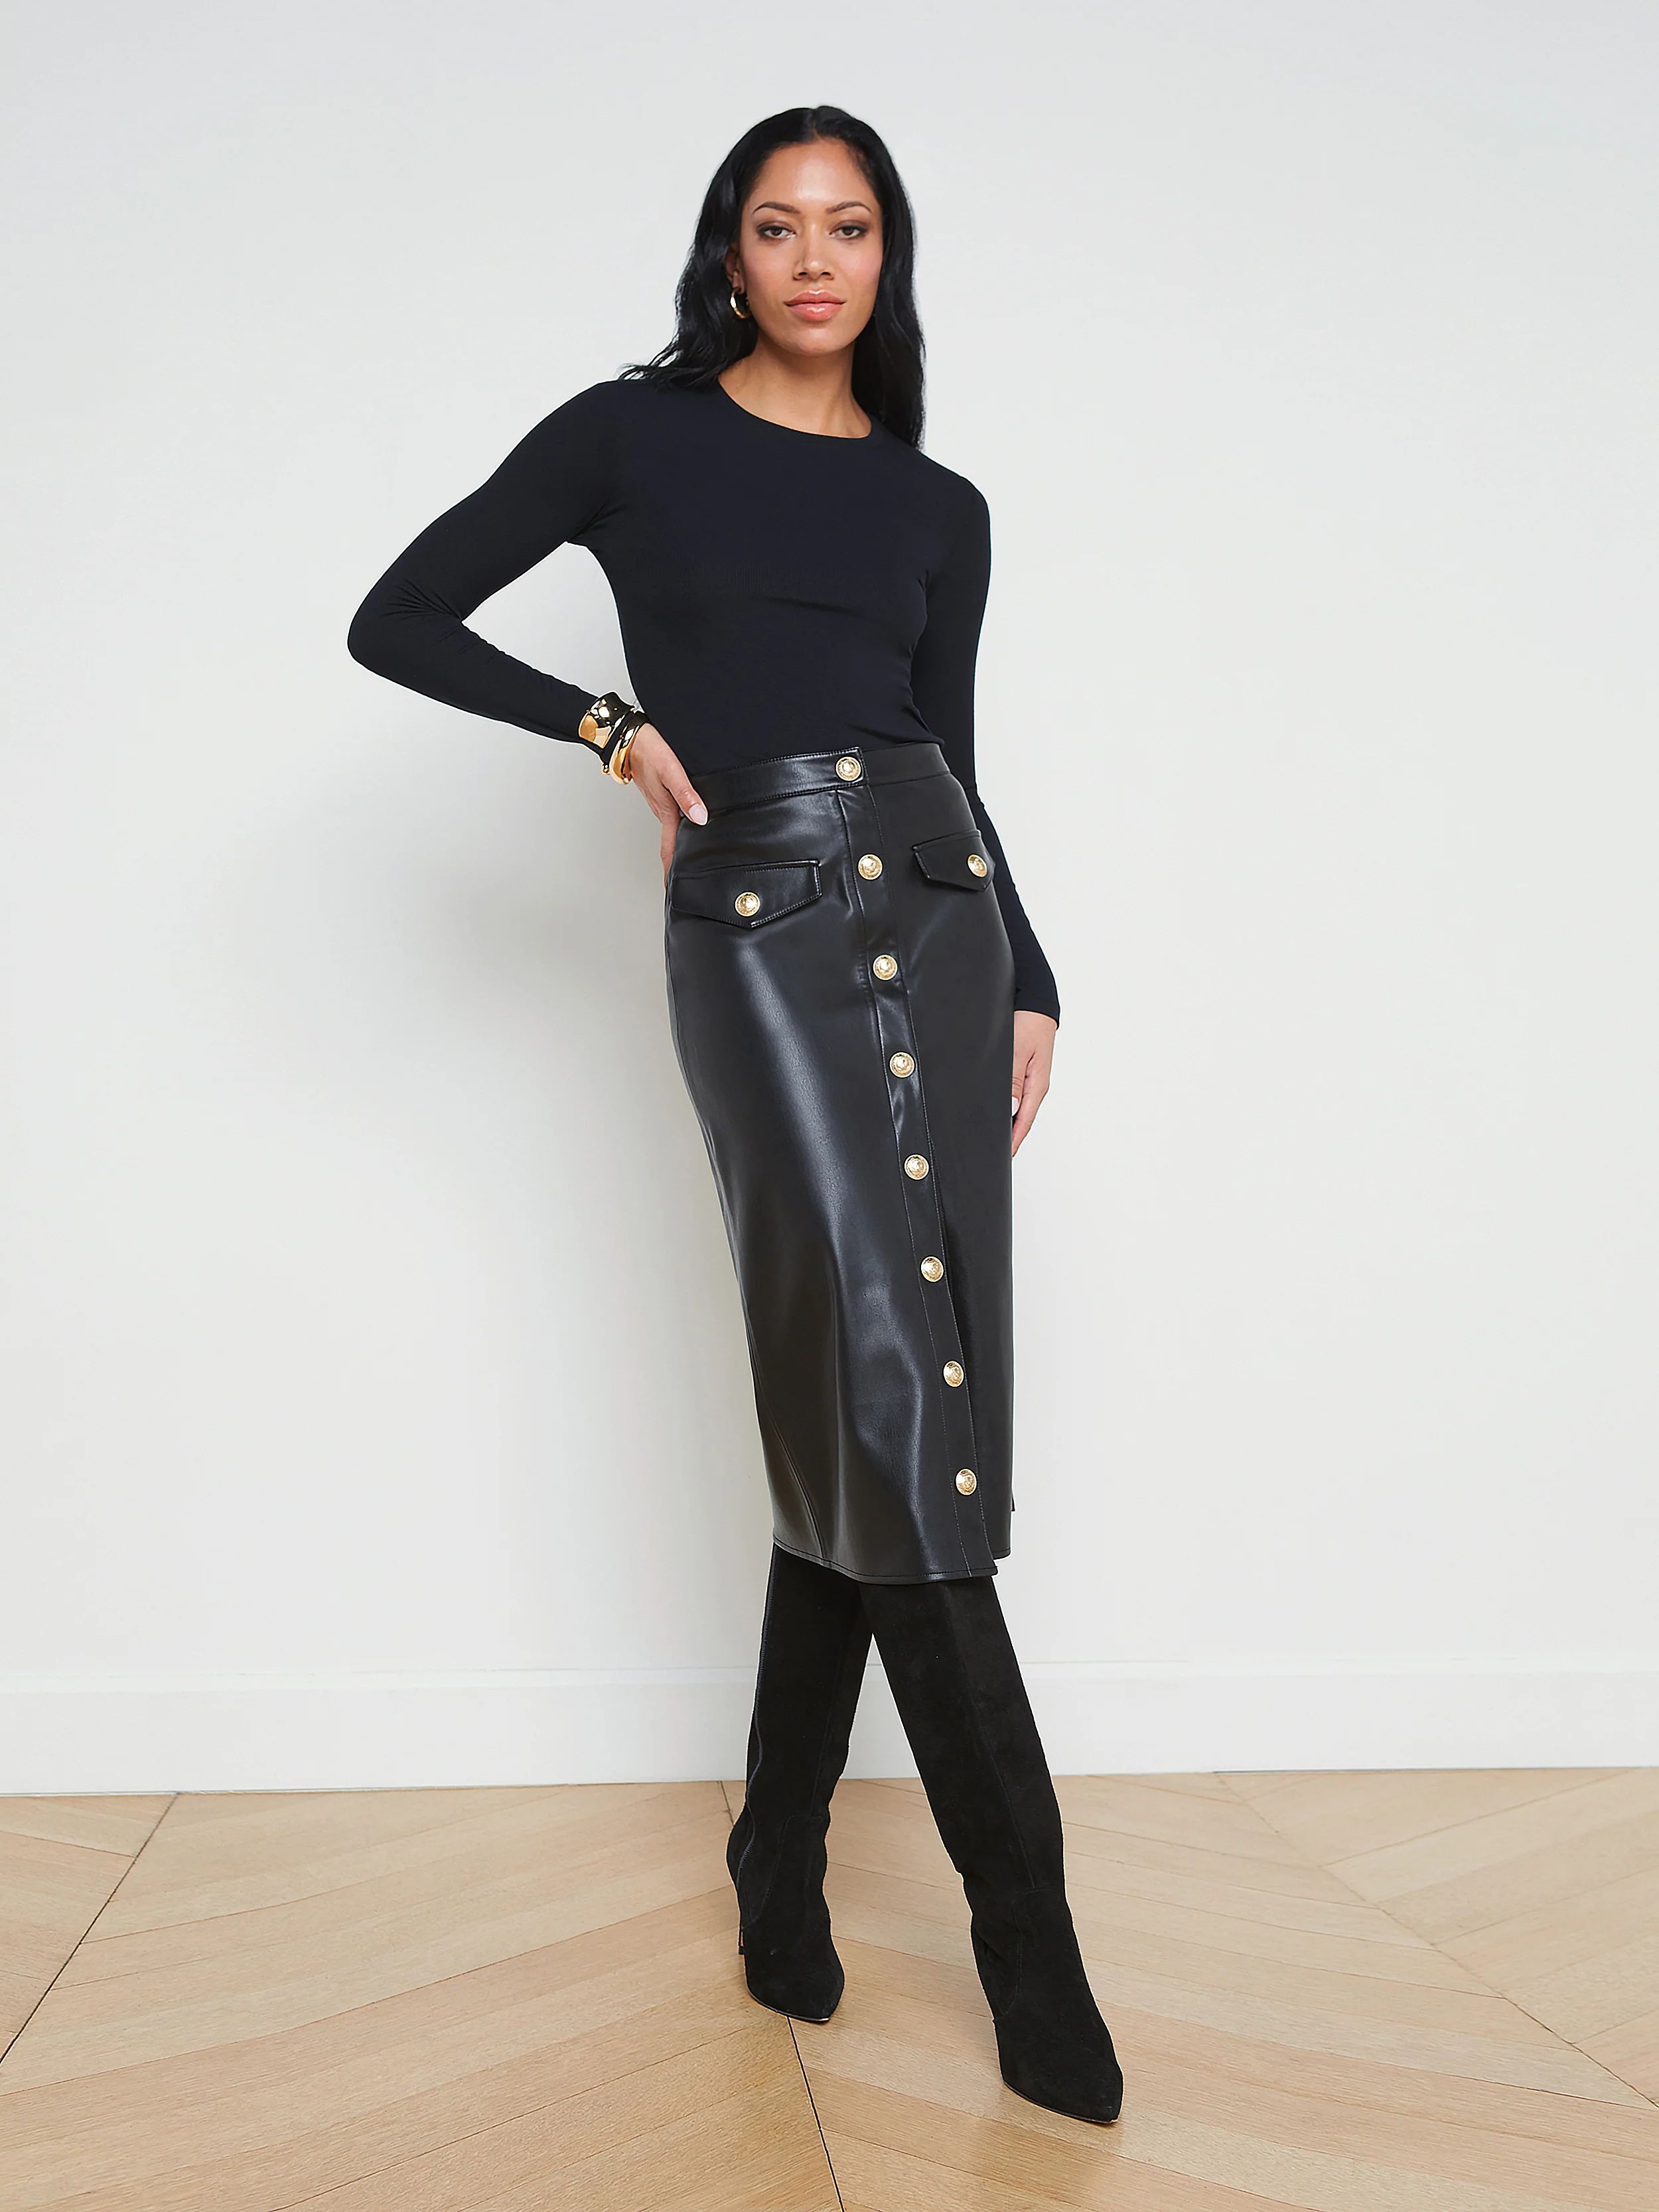 L'AGENCE - Milann Faux Leather Button Midi Skirt in Black | L'Agence